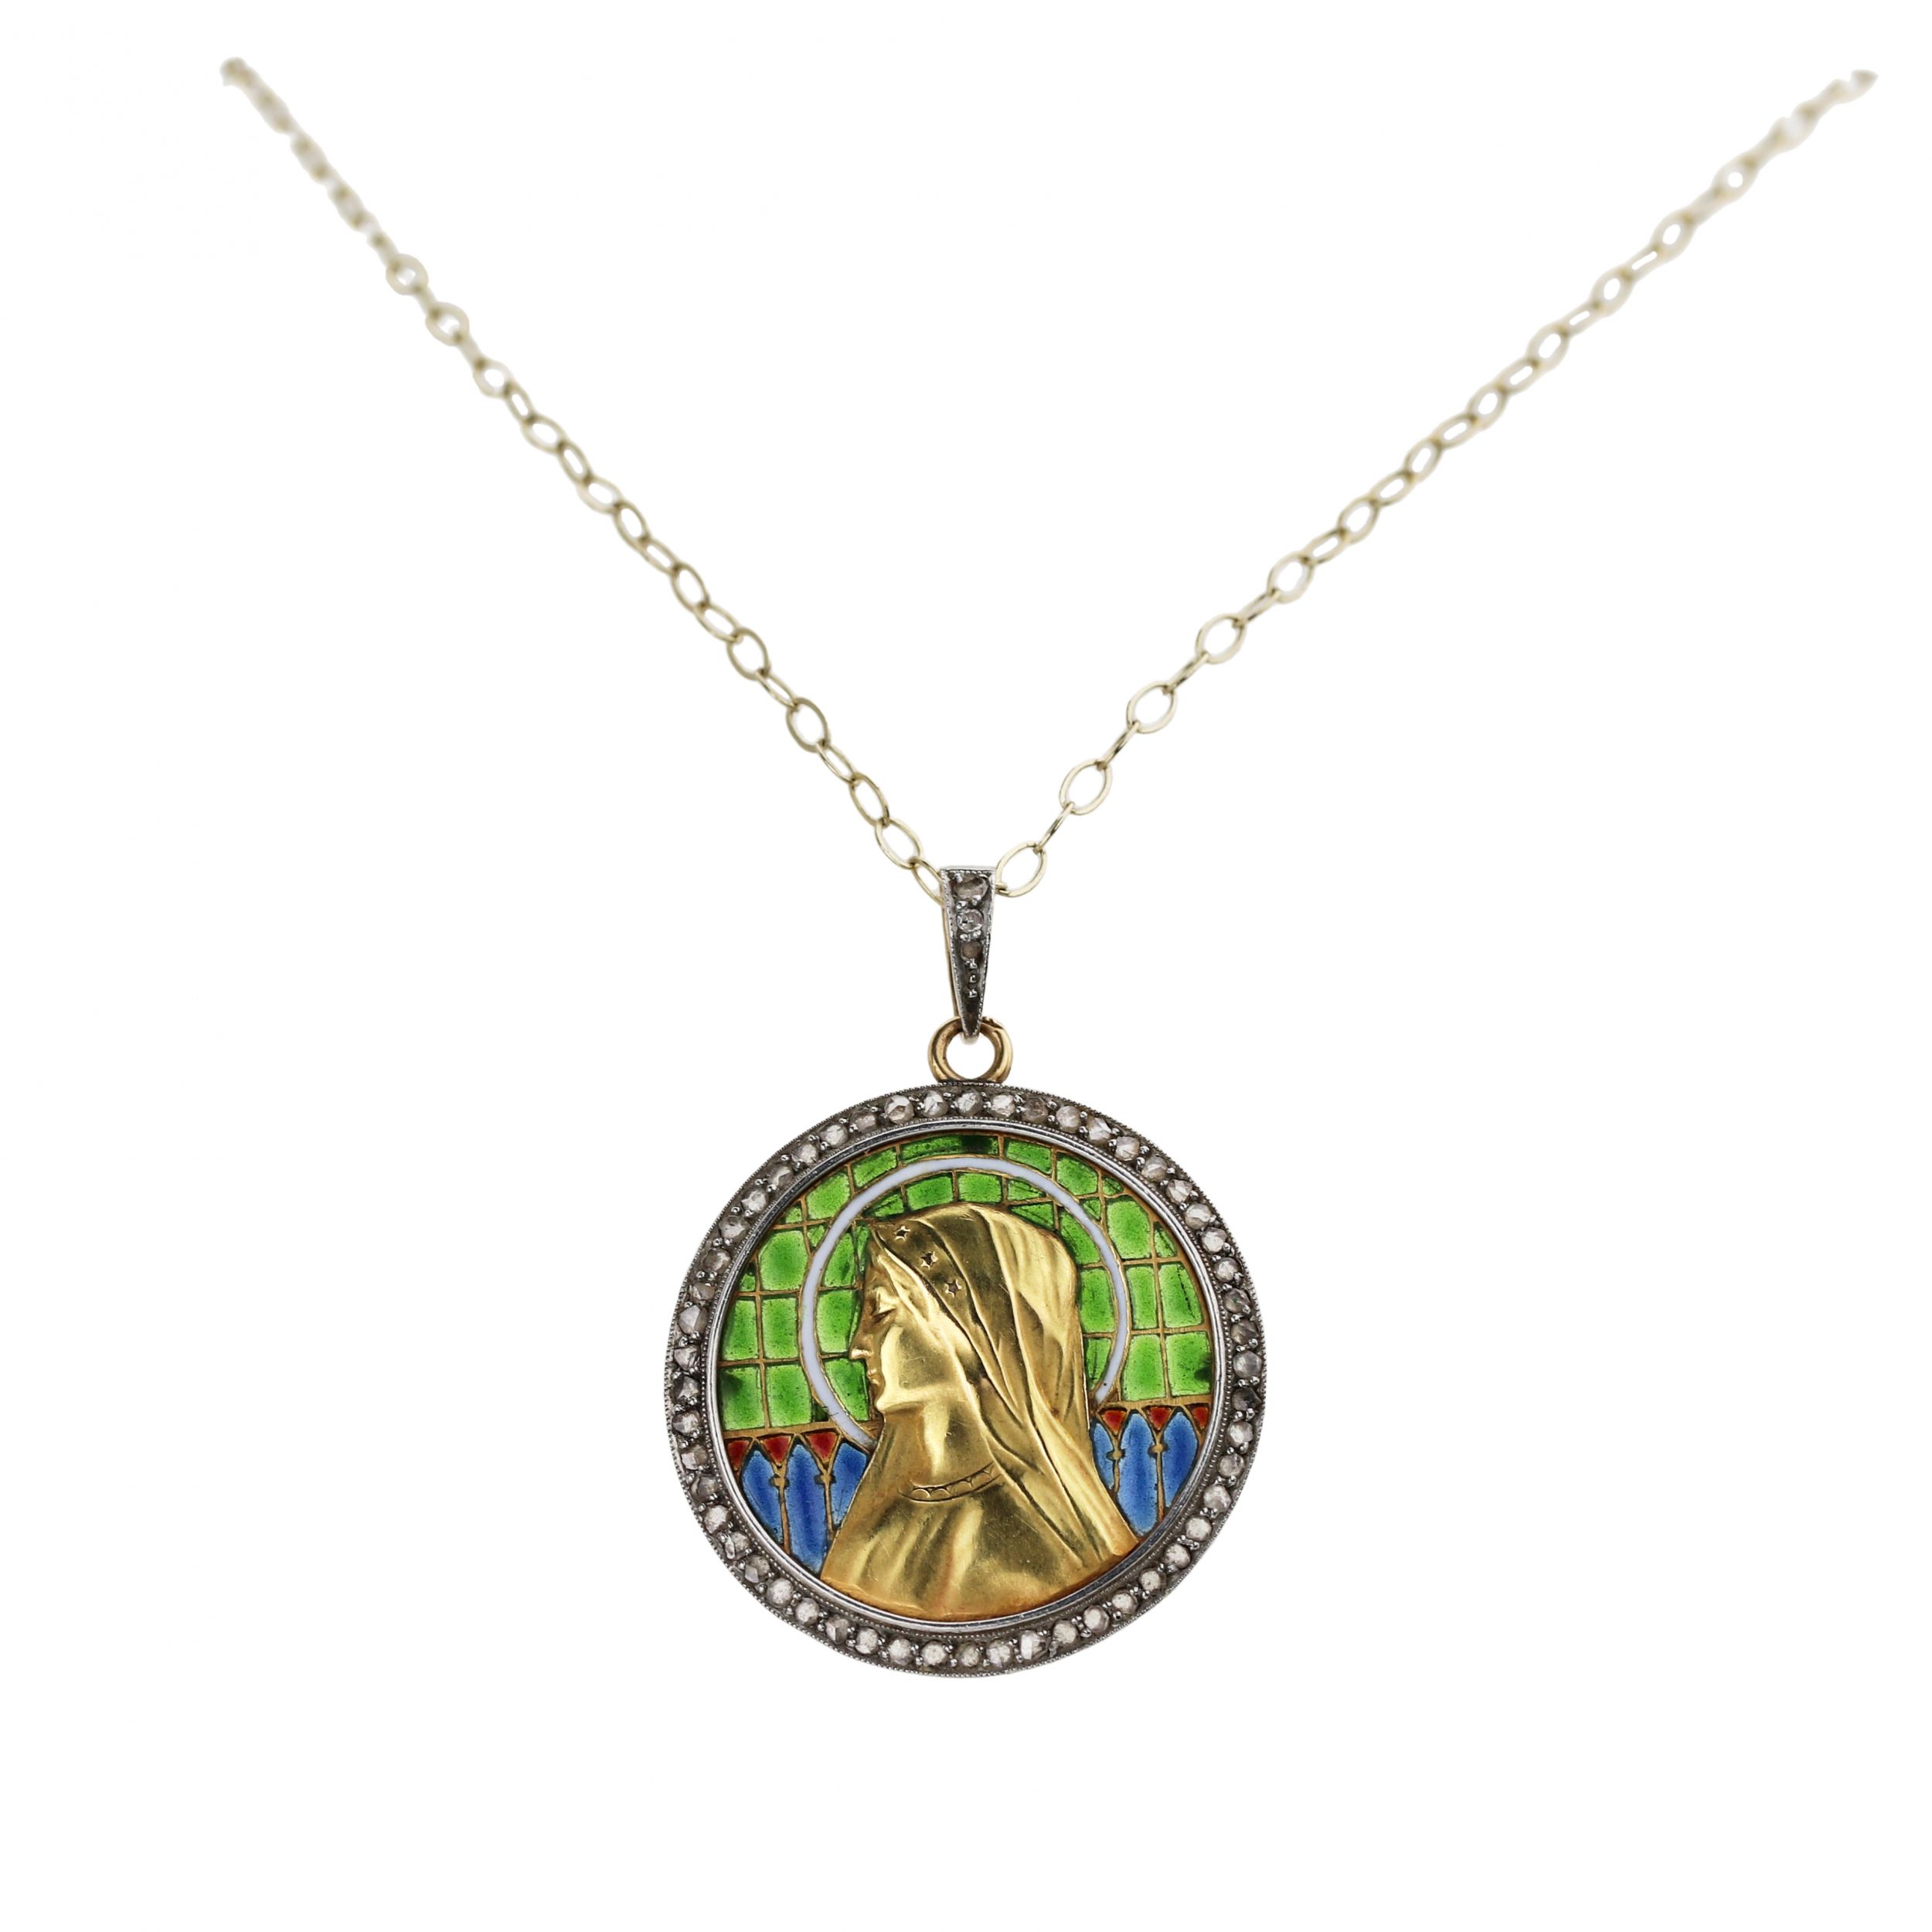 An-elegant-gold-pendant-on-a-chain-with-Our-Lady-on-stained-glass-enamel-in-an-antique-case-